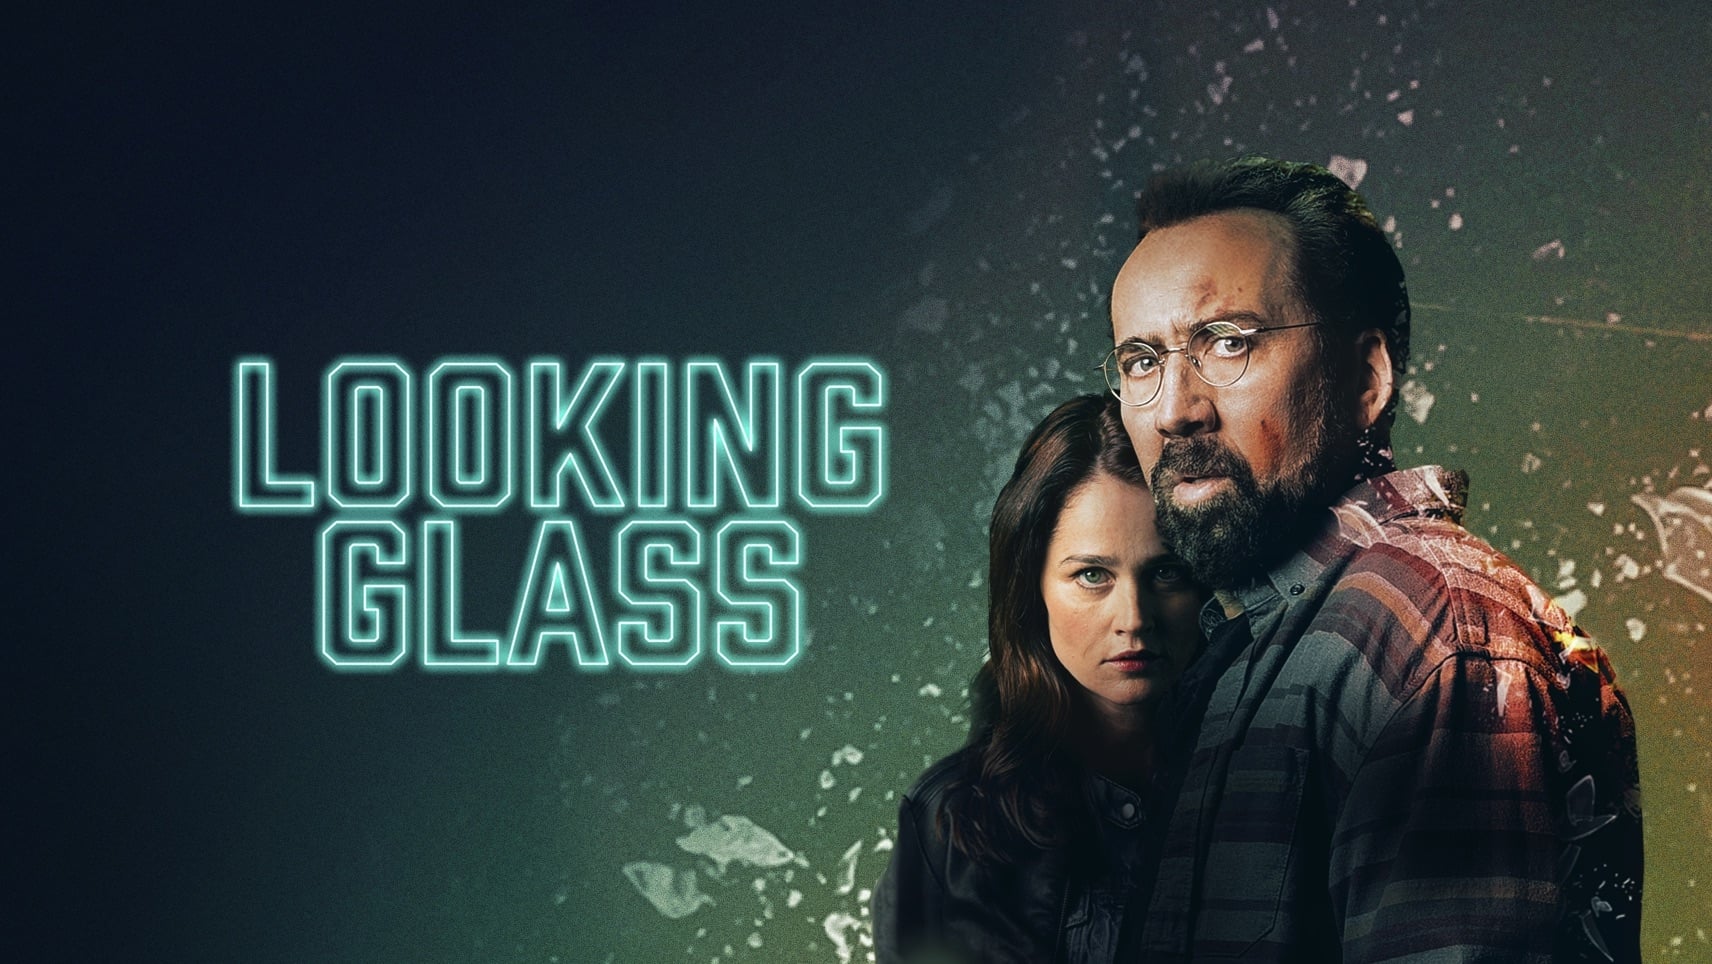 Looking Glass (2018)